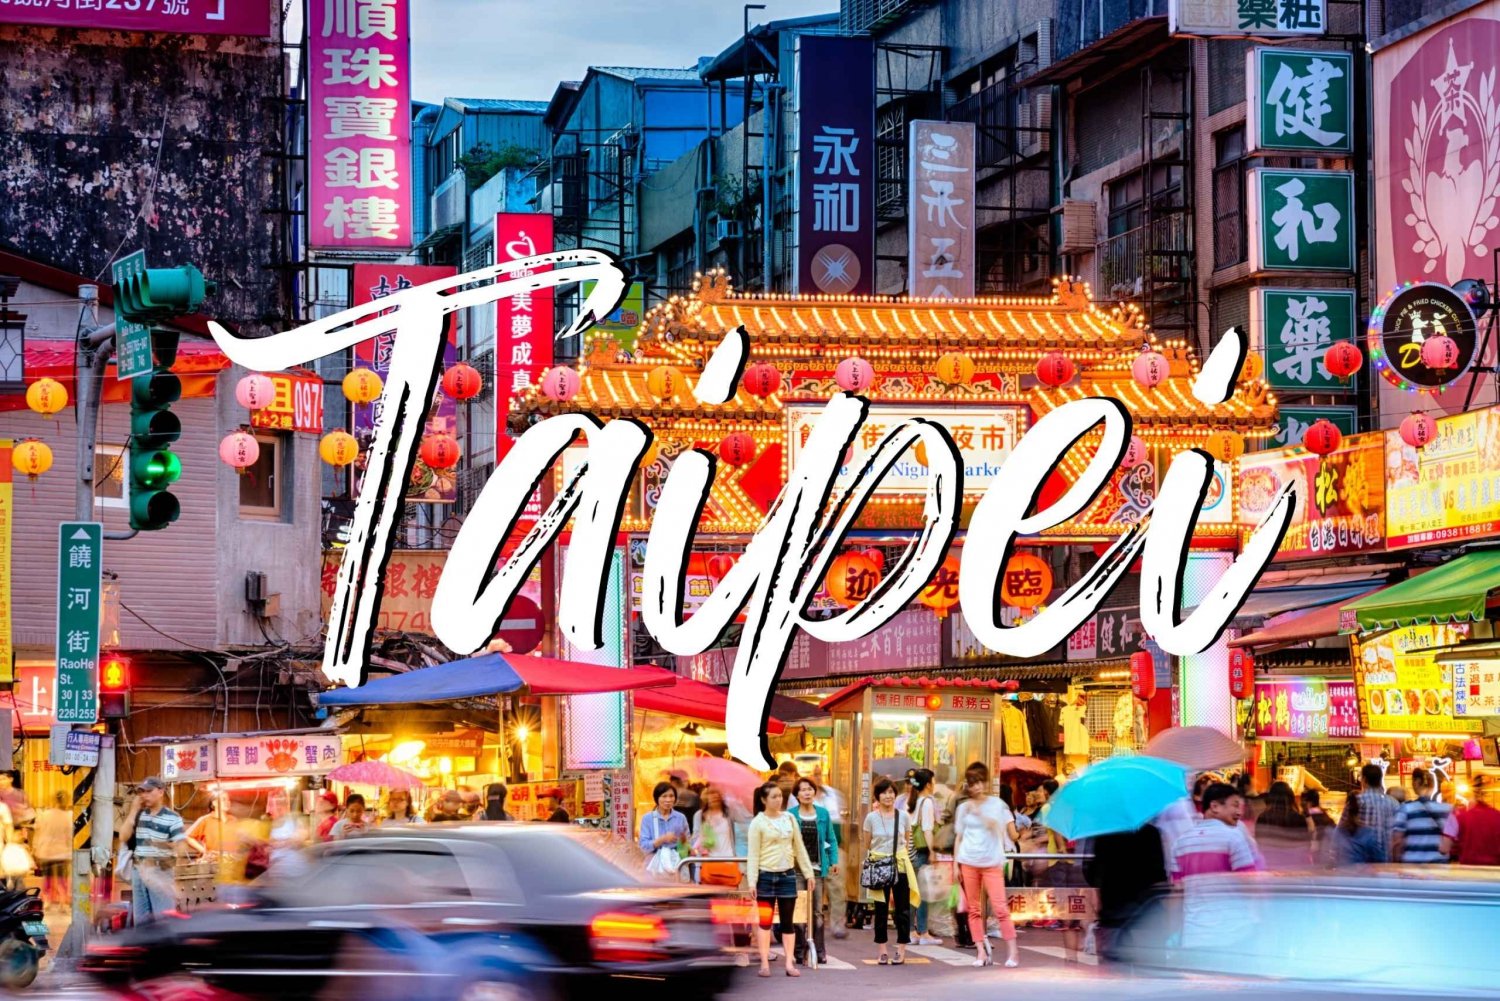 Taipei Package 1: Free & Easy with Suggested Walking Tour